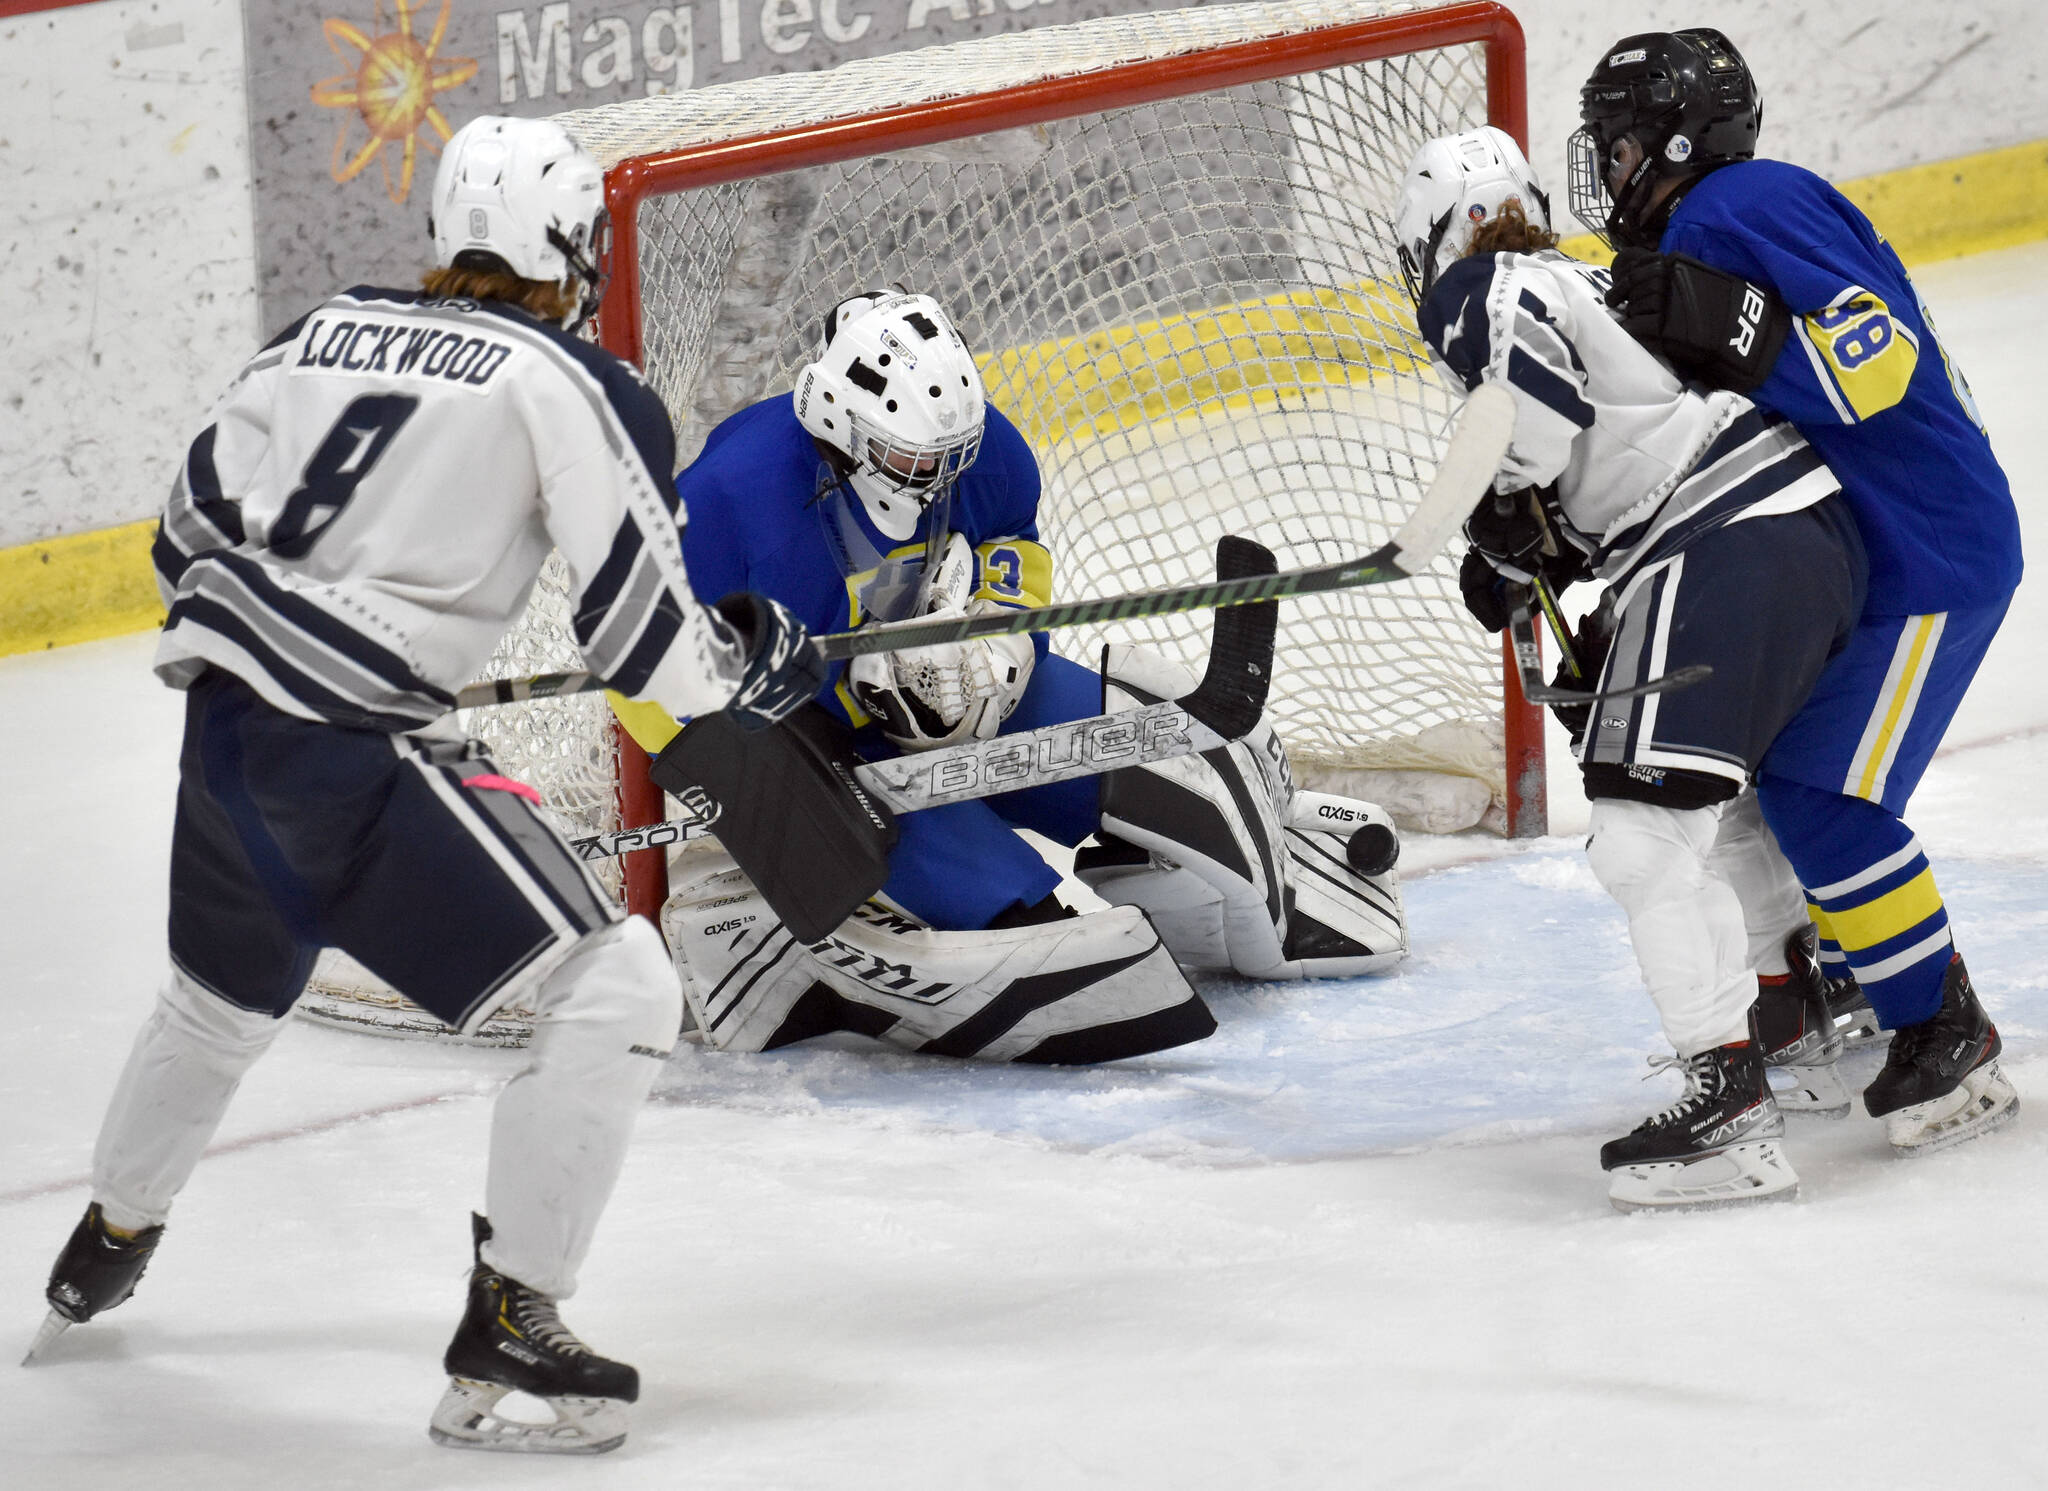 Kodiak goalie Aiden Johnson makes a save in front of Soldotna’s Dawson Lockwood and Libby Miller on Friday, Dec. 2, 2022, at the Soldotna Regional Sports Complex in Soldotna, Alaska. (Photo by Jeff Helminiak/Peninsula Clarion)